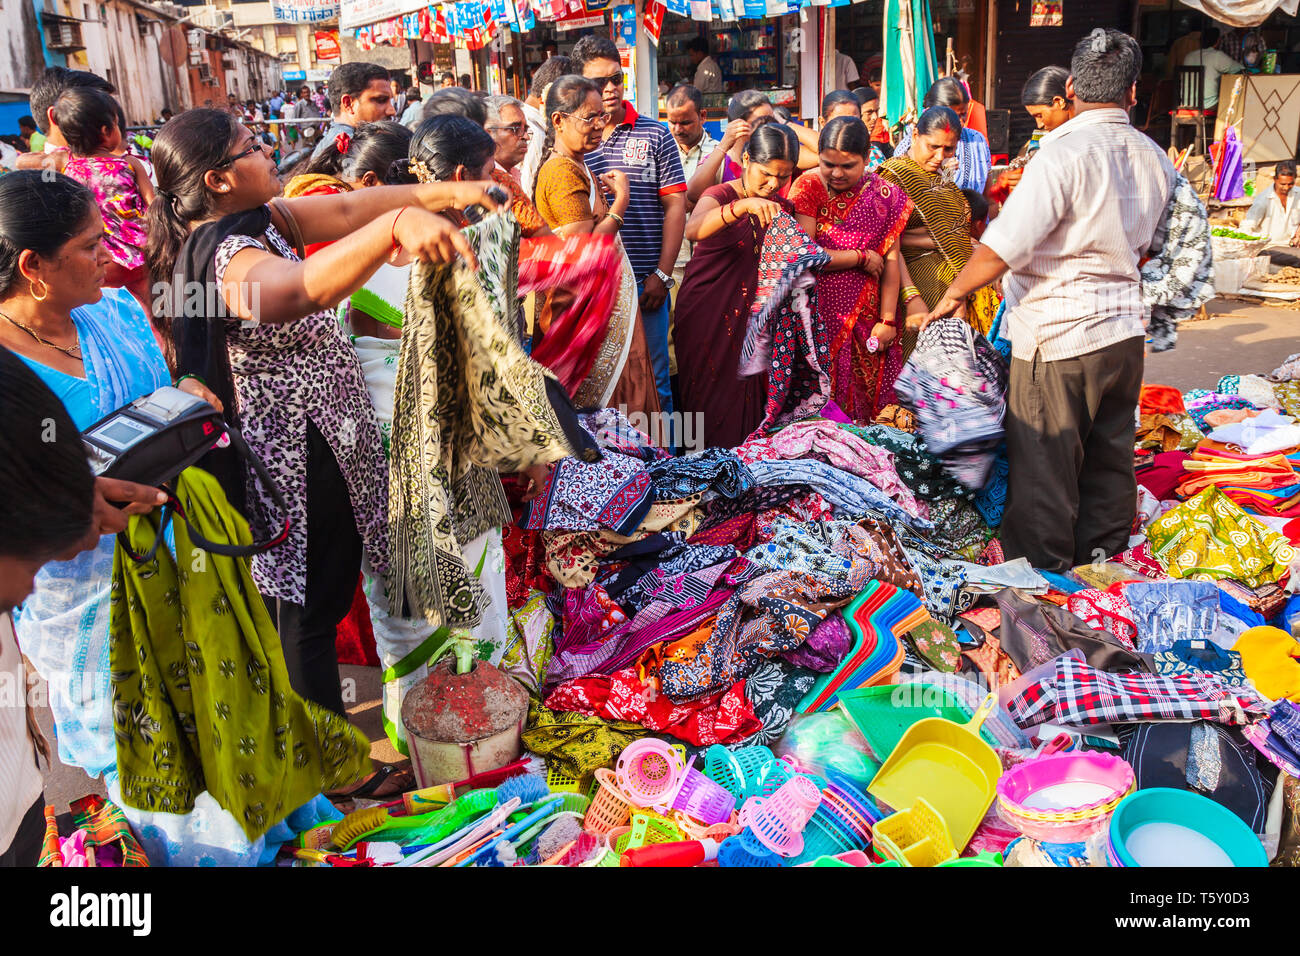 GOA, INDIA - APRIL 06, 2012: Indian dress and fabric at the local market in India Stock Photo